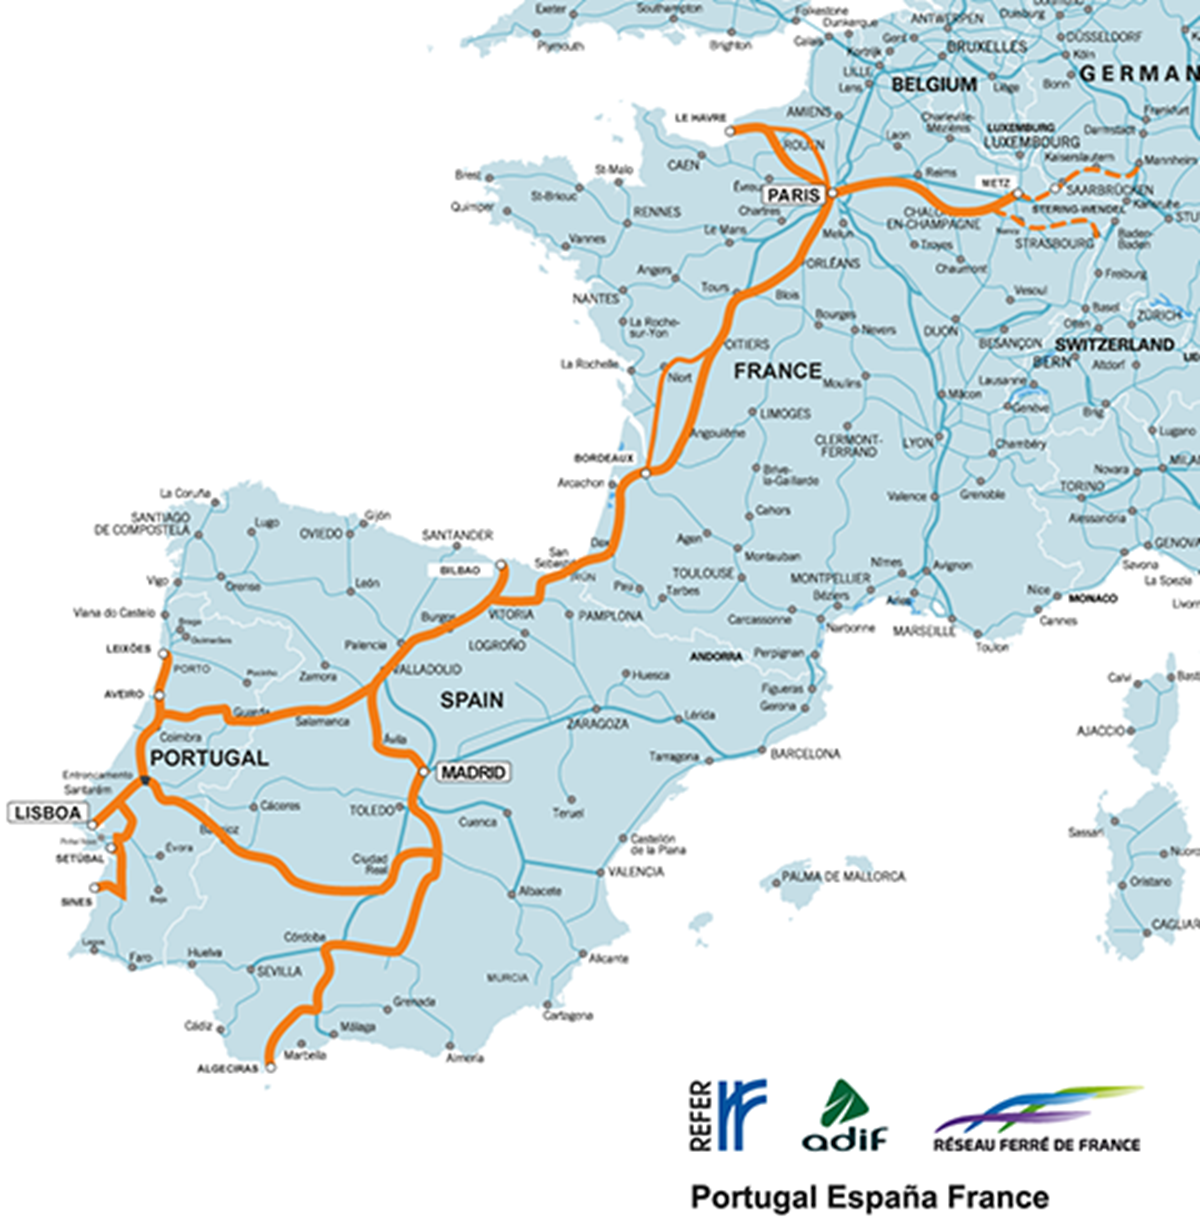 European Freight Corridor „Atlantic“ extends to Germany by 1 January 2016: new Connection to France and the Iberian Peninsula